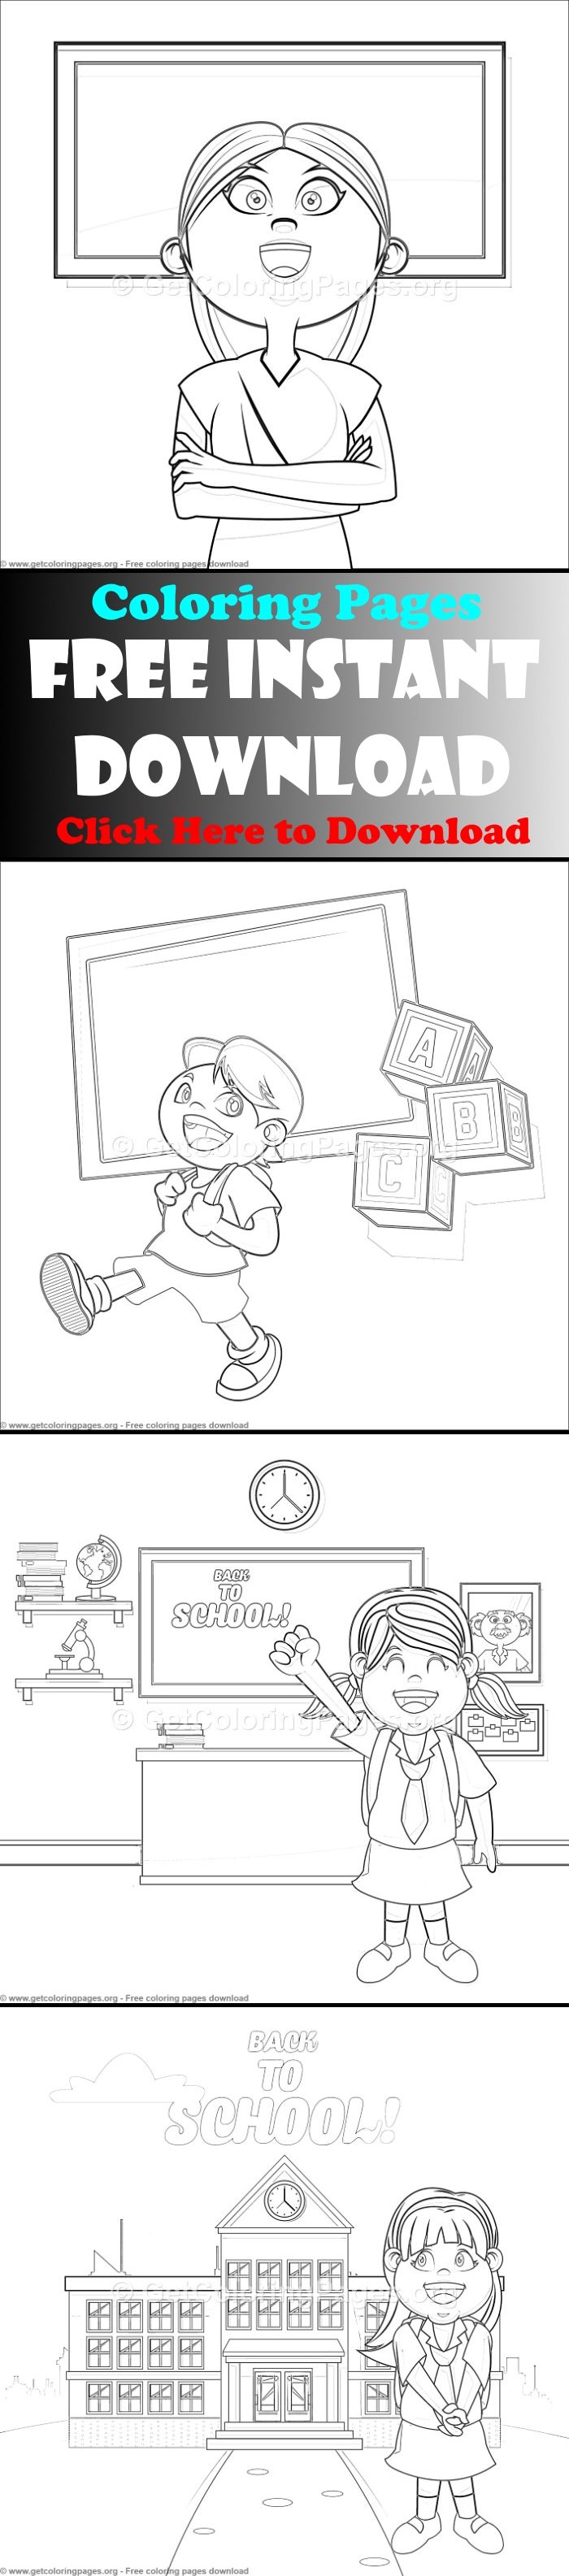 back to school coloring sheet